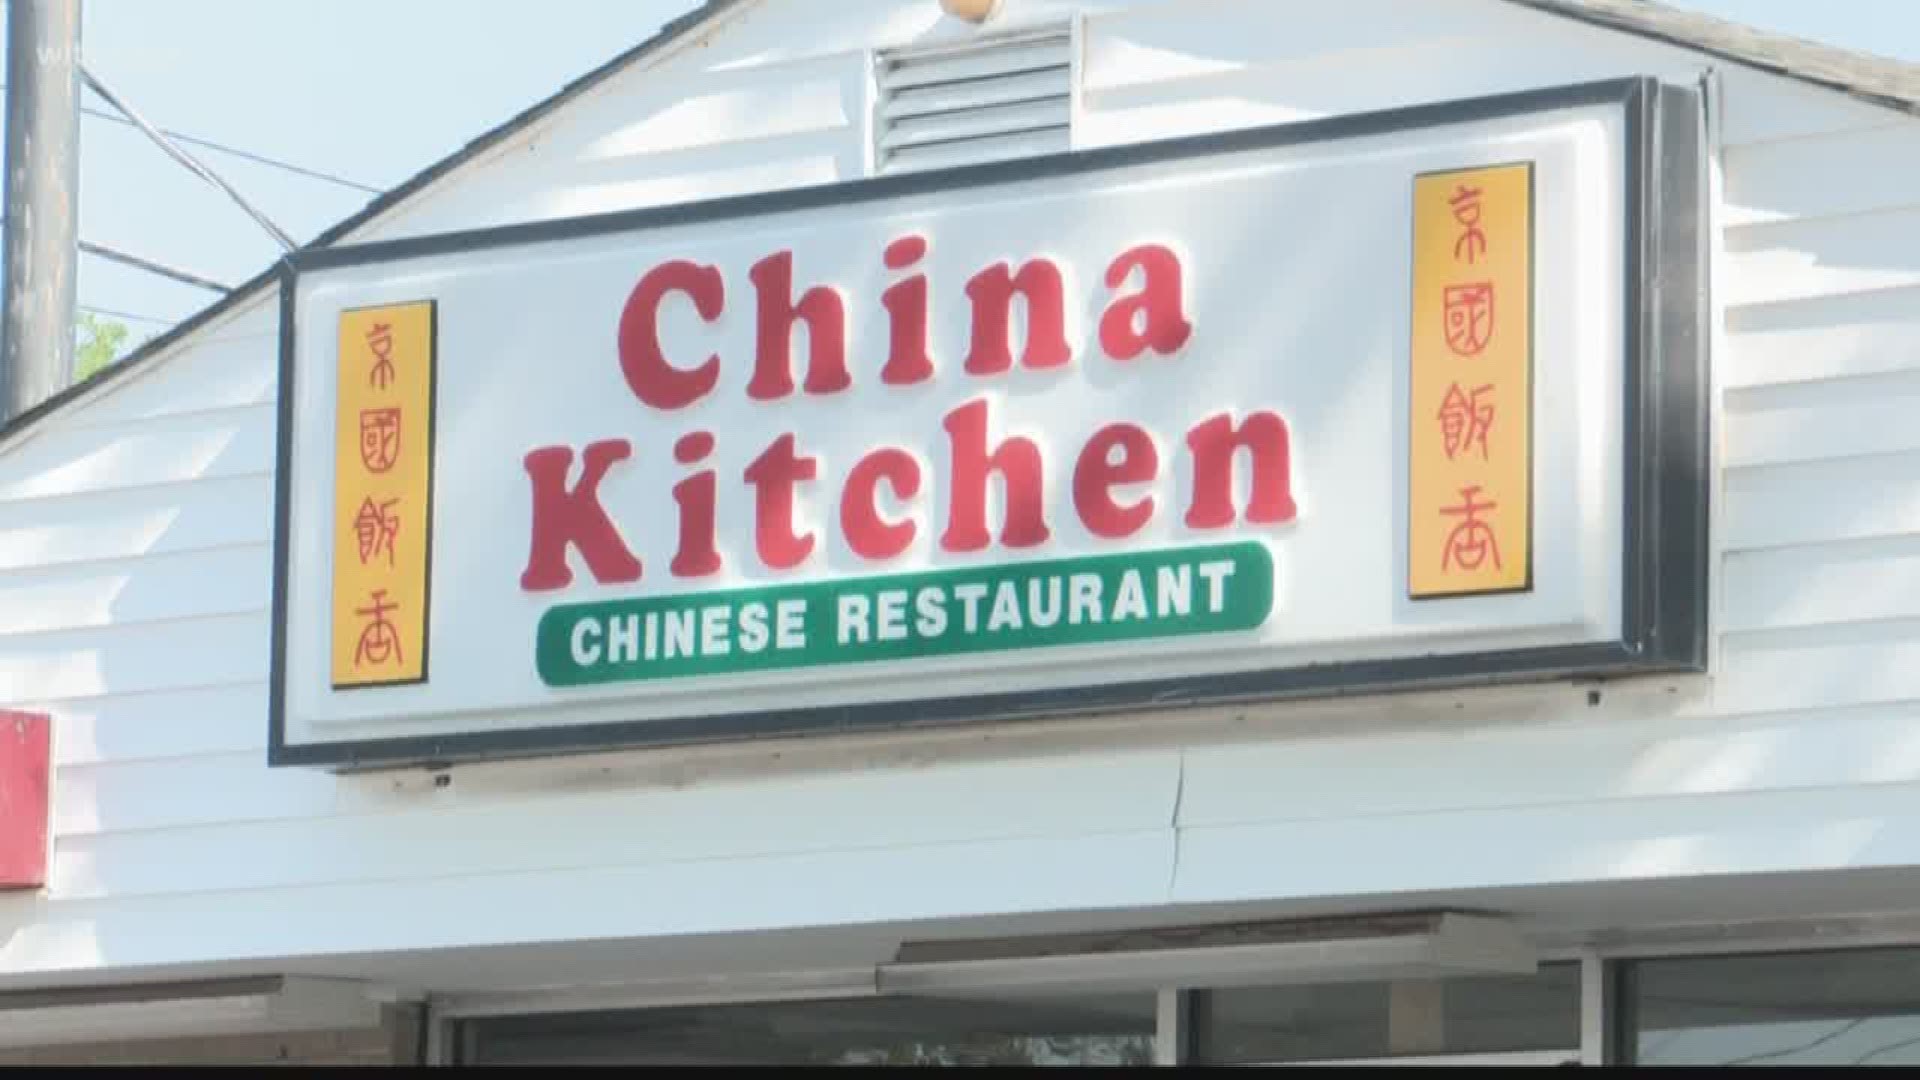 Columbia police say an employee at the China Kitchen in Columbia killed a suspect who was attacking a member of his family.